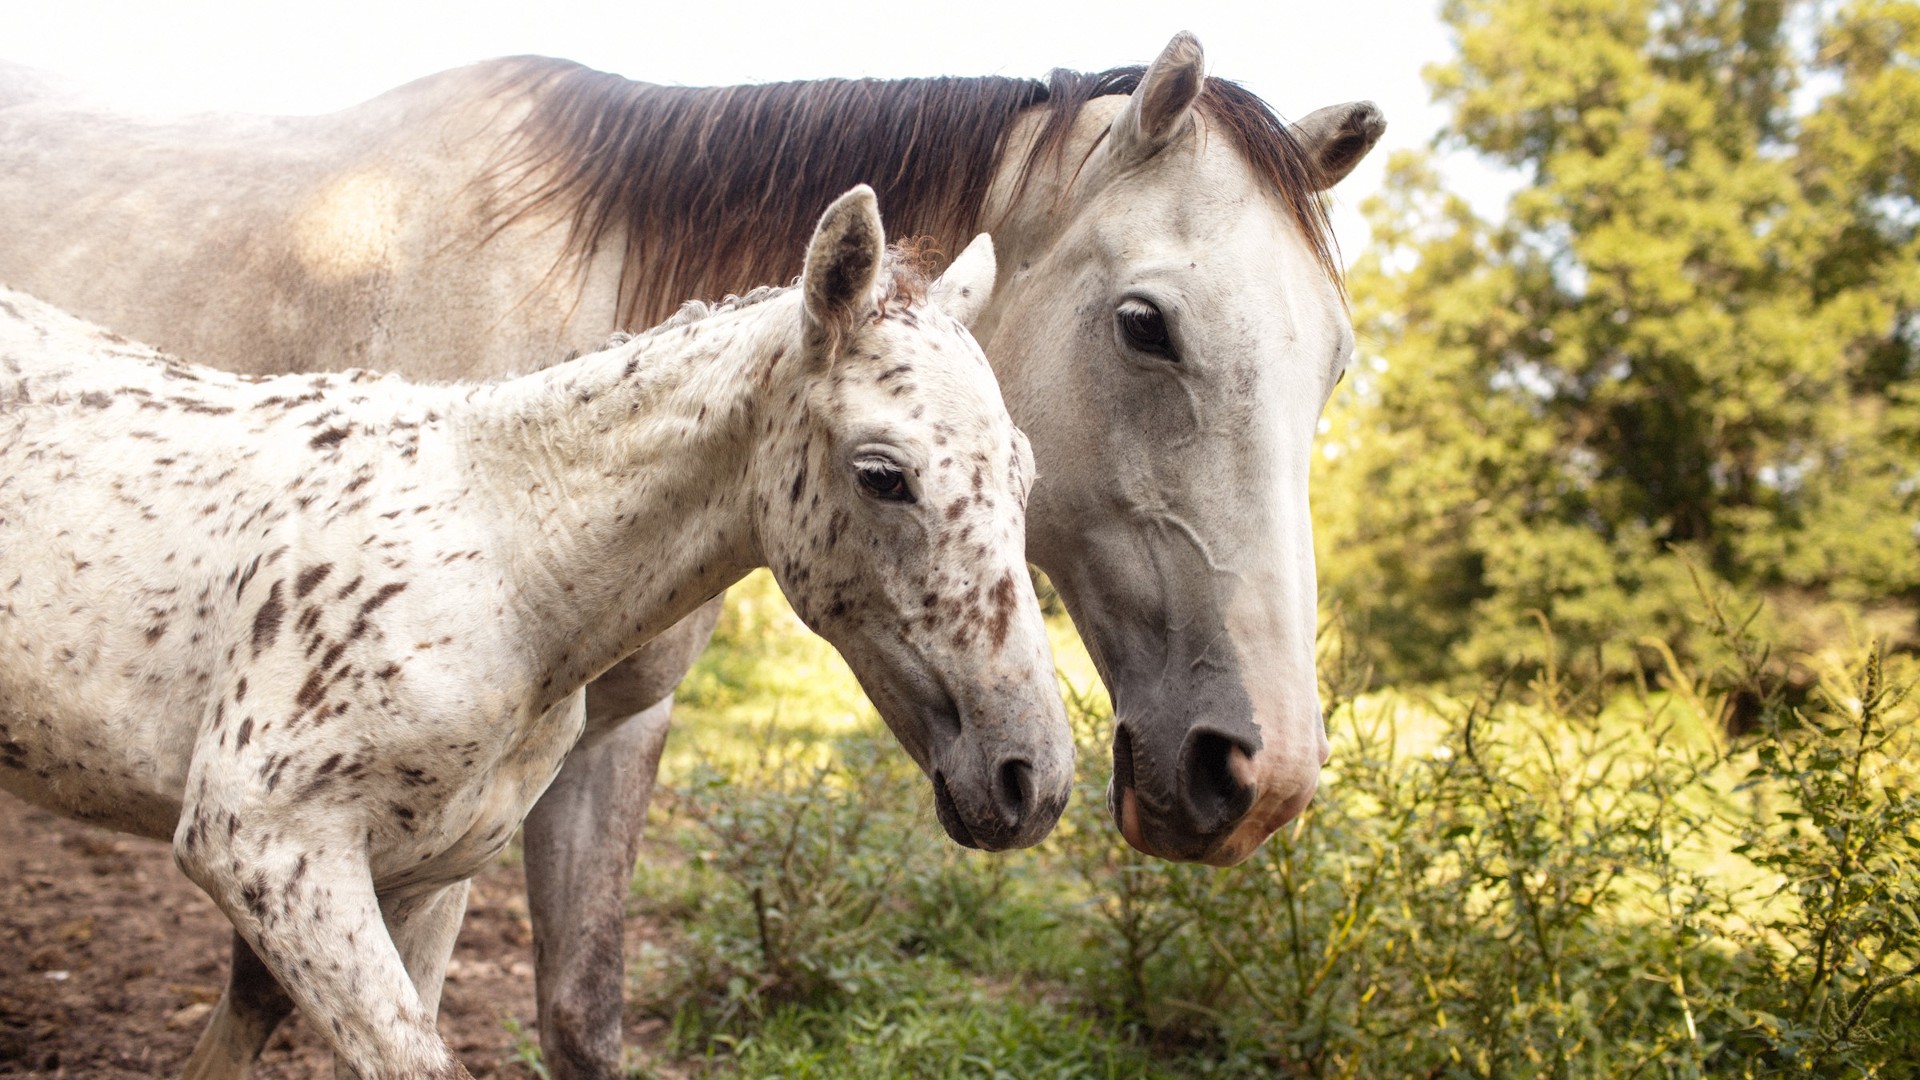 photo shows a white adult horse with a brown mane walking alongside a fowl with white fur speckled with brown spots